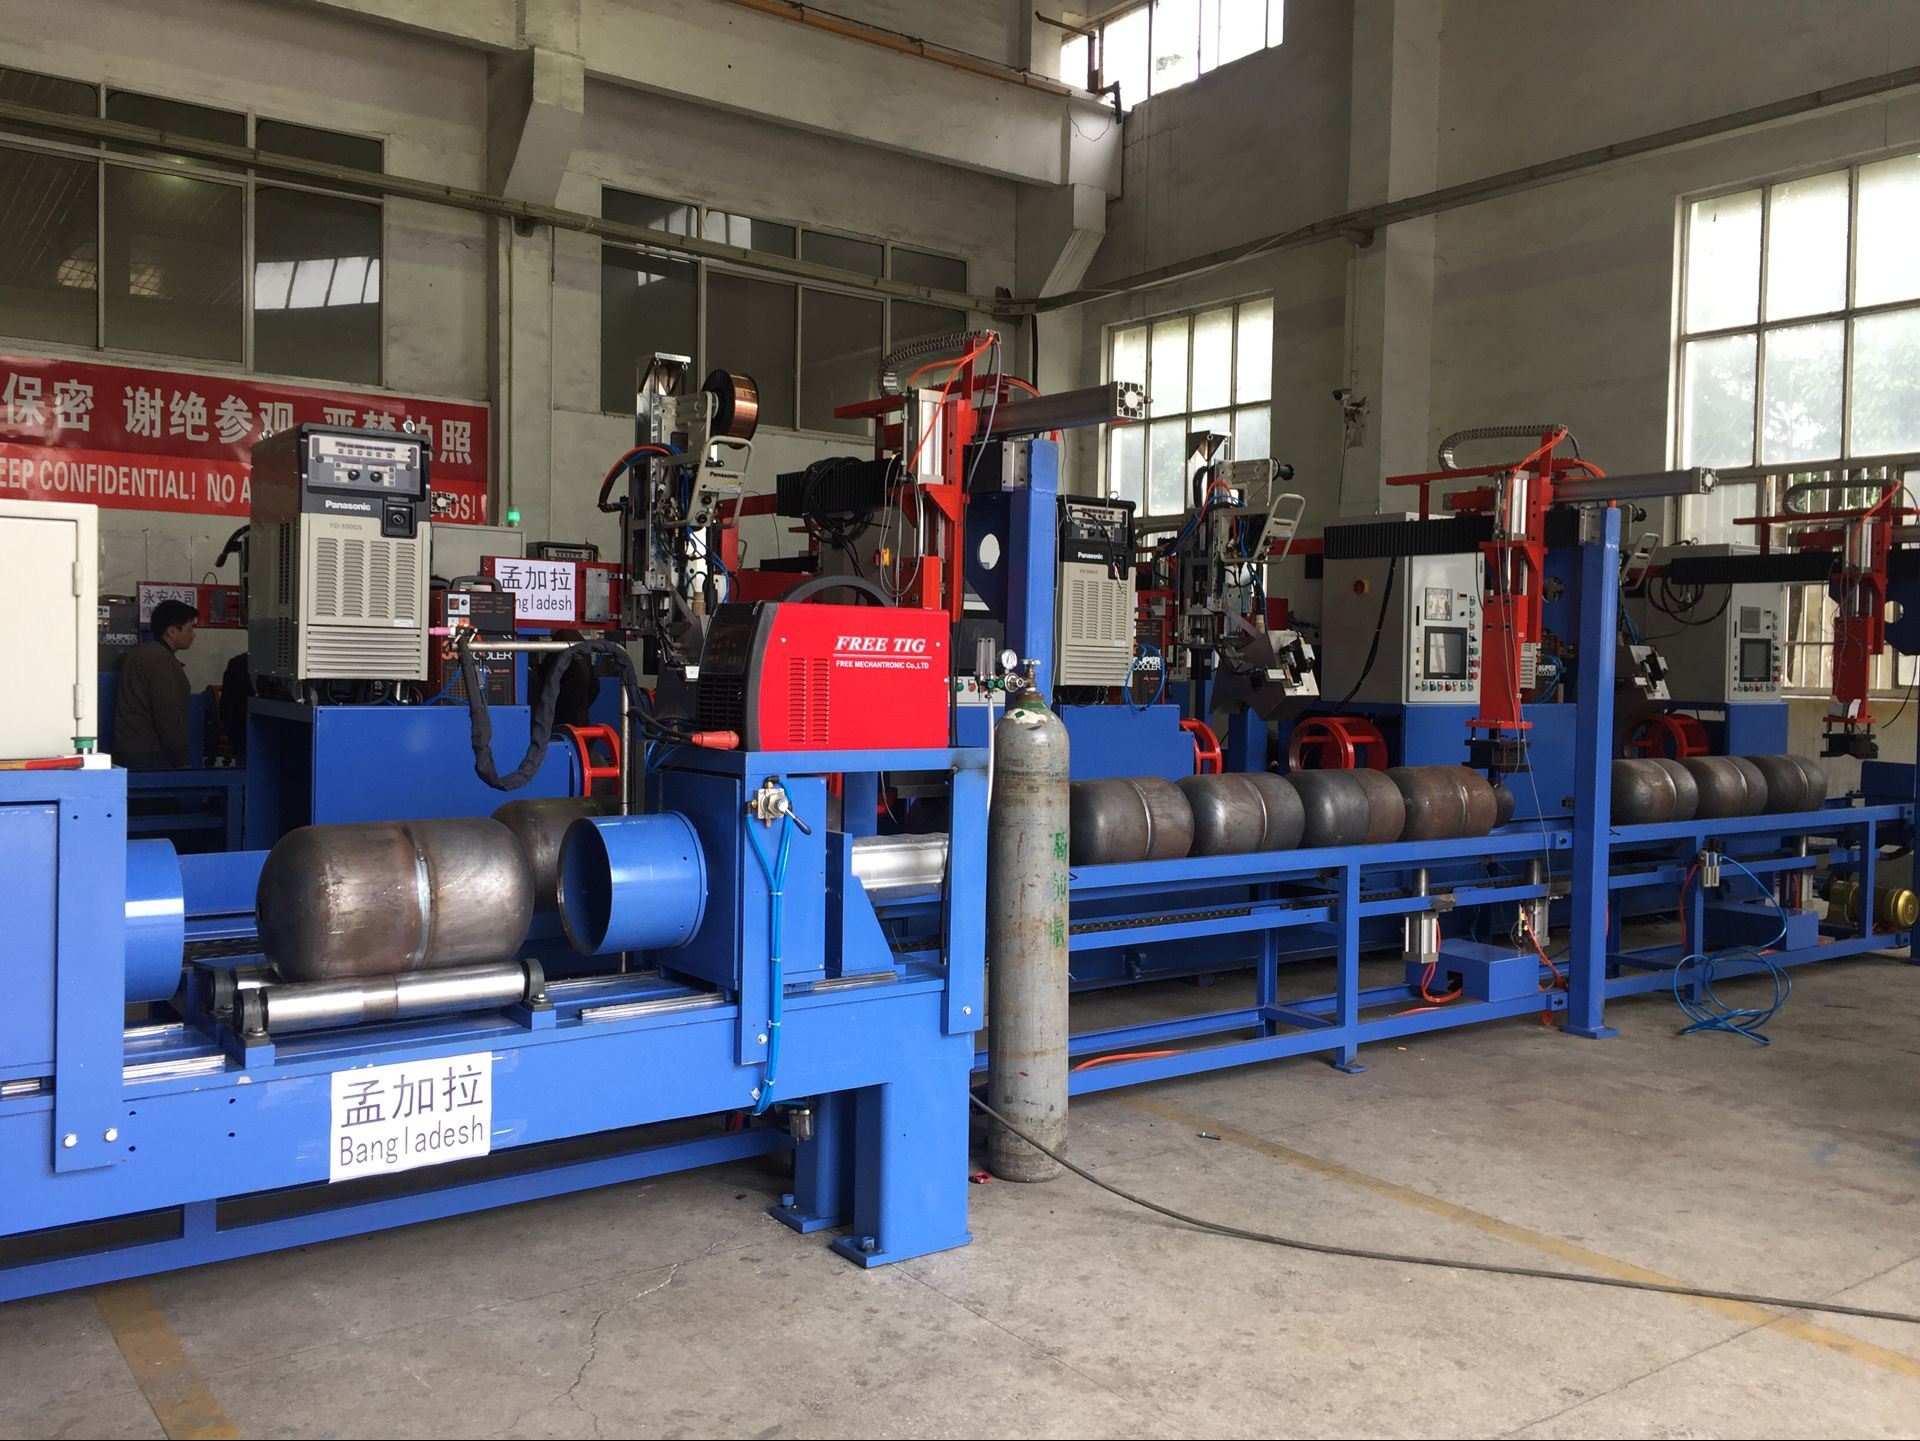 Automatic Body Welding Machine Without Manual Work